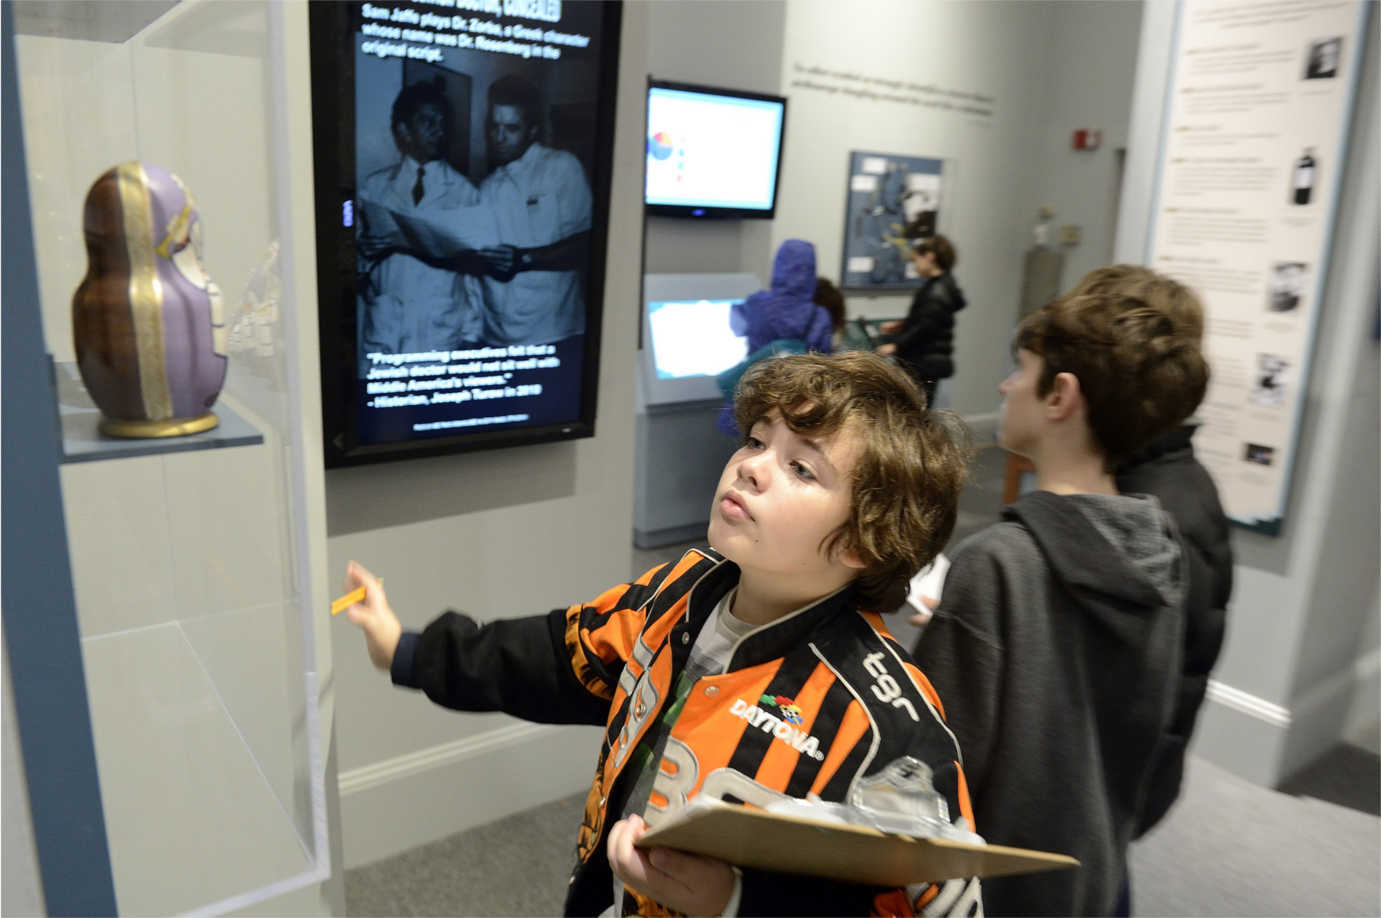 Students explore *Beyond Chicken Soup: Jews and Medicine in America*. Image courtesy of the Jewish Museum of Maryland.